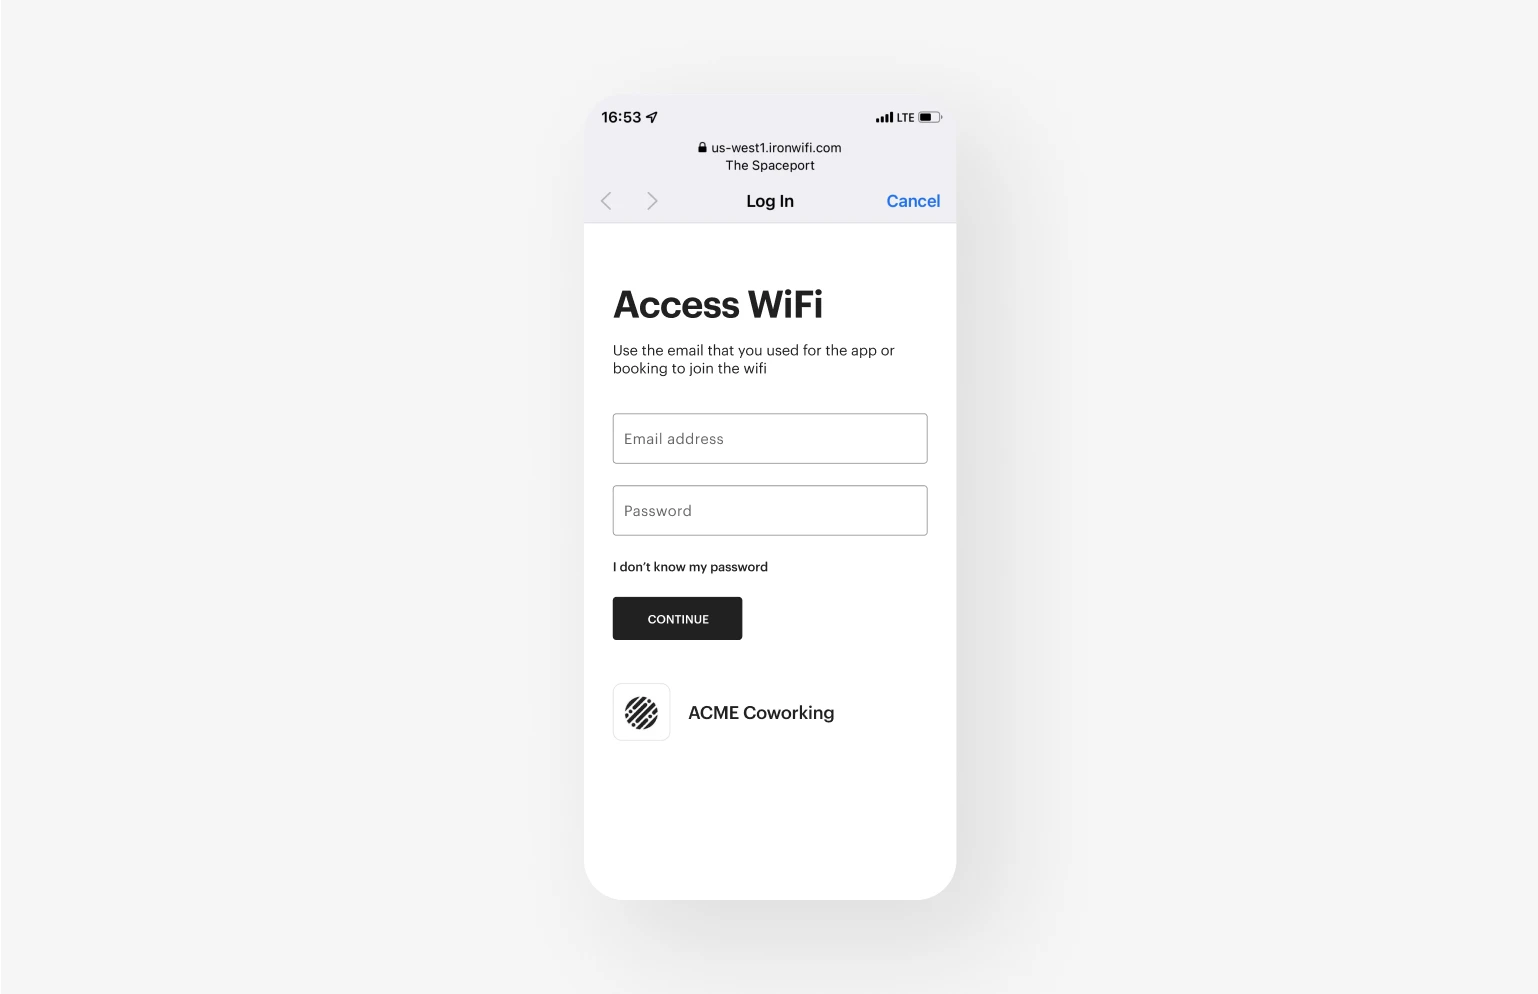 IronWiFi and Optix integration for coworking spaces